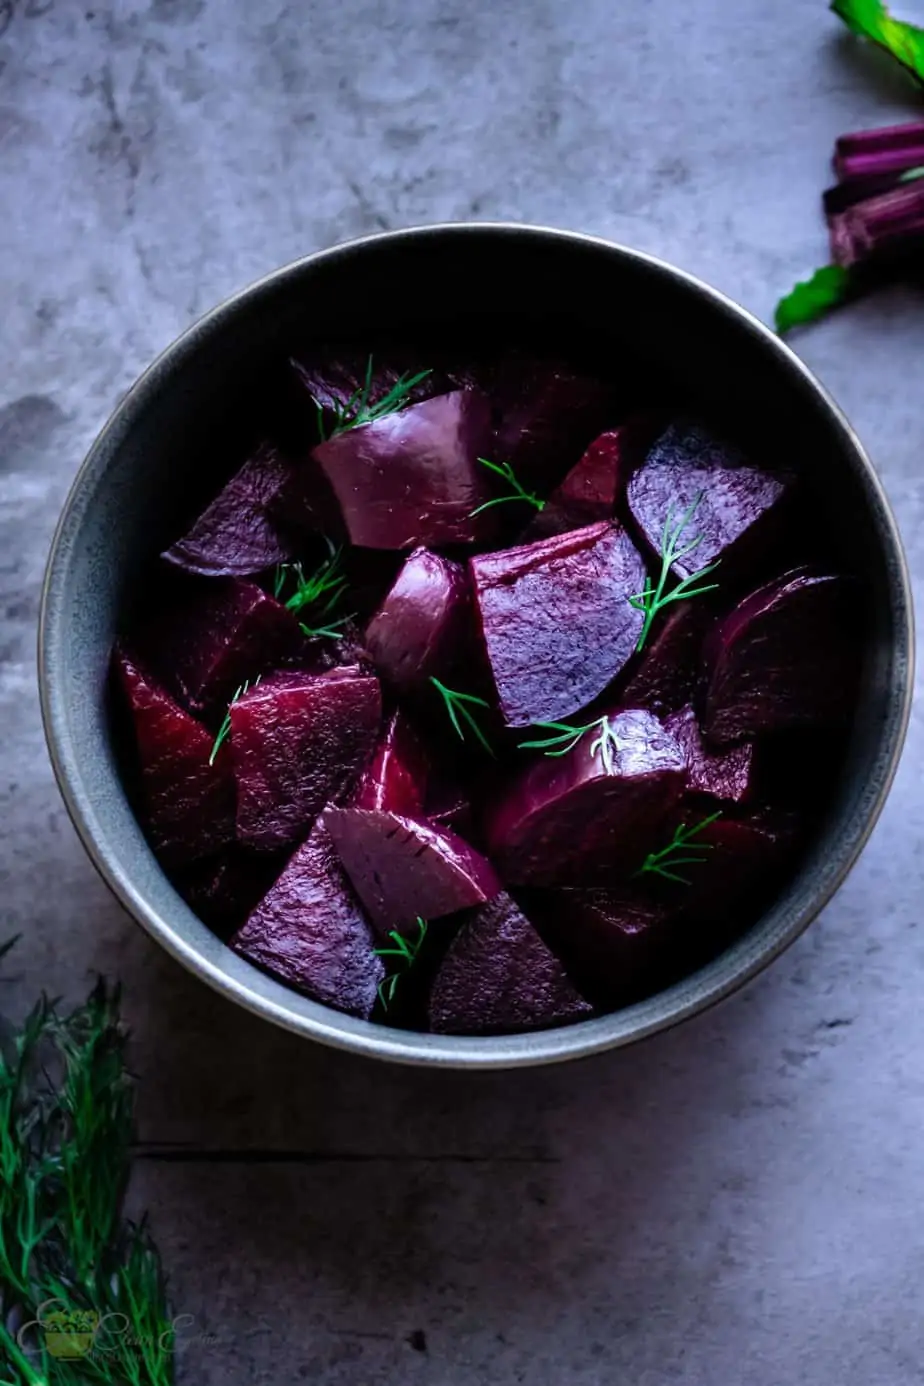 chopped pressure cooked beets in the instant pot with some dill sprinkle on top.